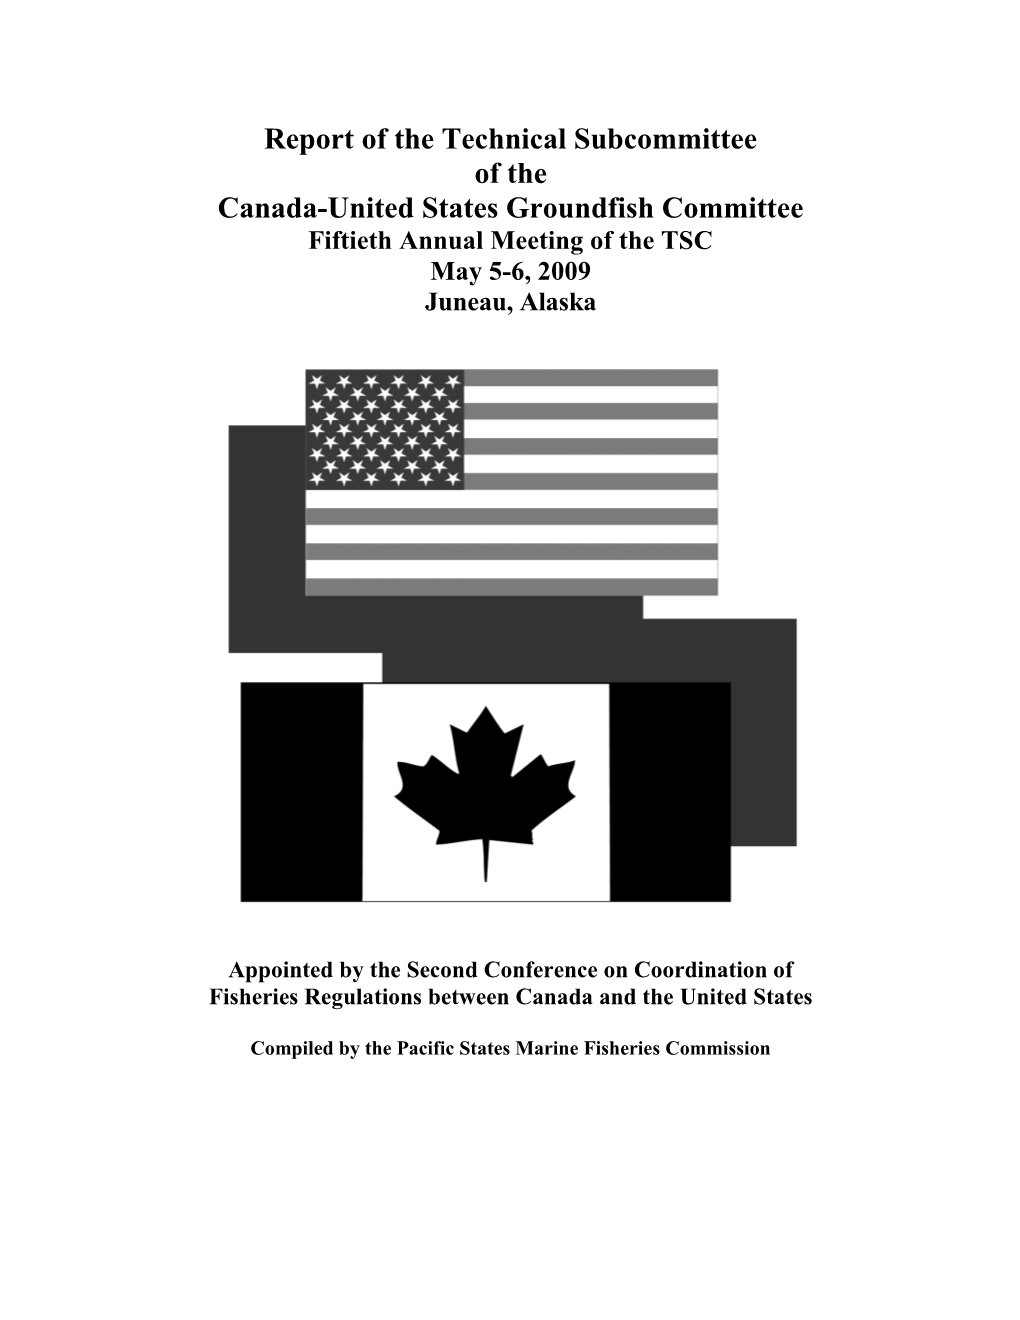 Report of the Technical Subcommittee of the Canada-United States Groundfish Committee Fiftieth Annual Meeting of the TSC May 5-6, 2009 Juneau, Alaska